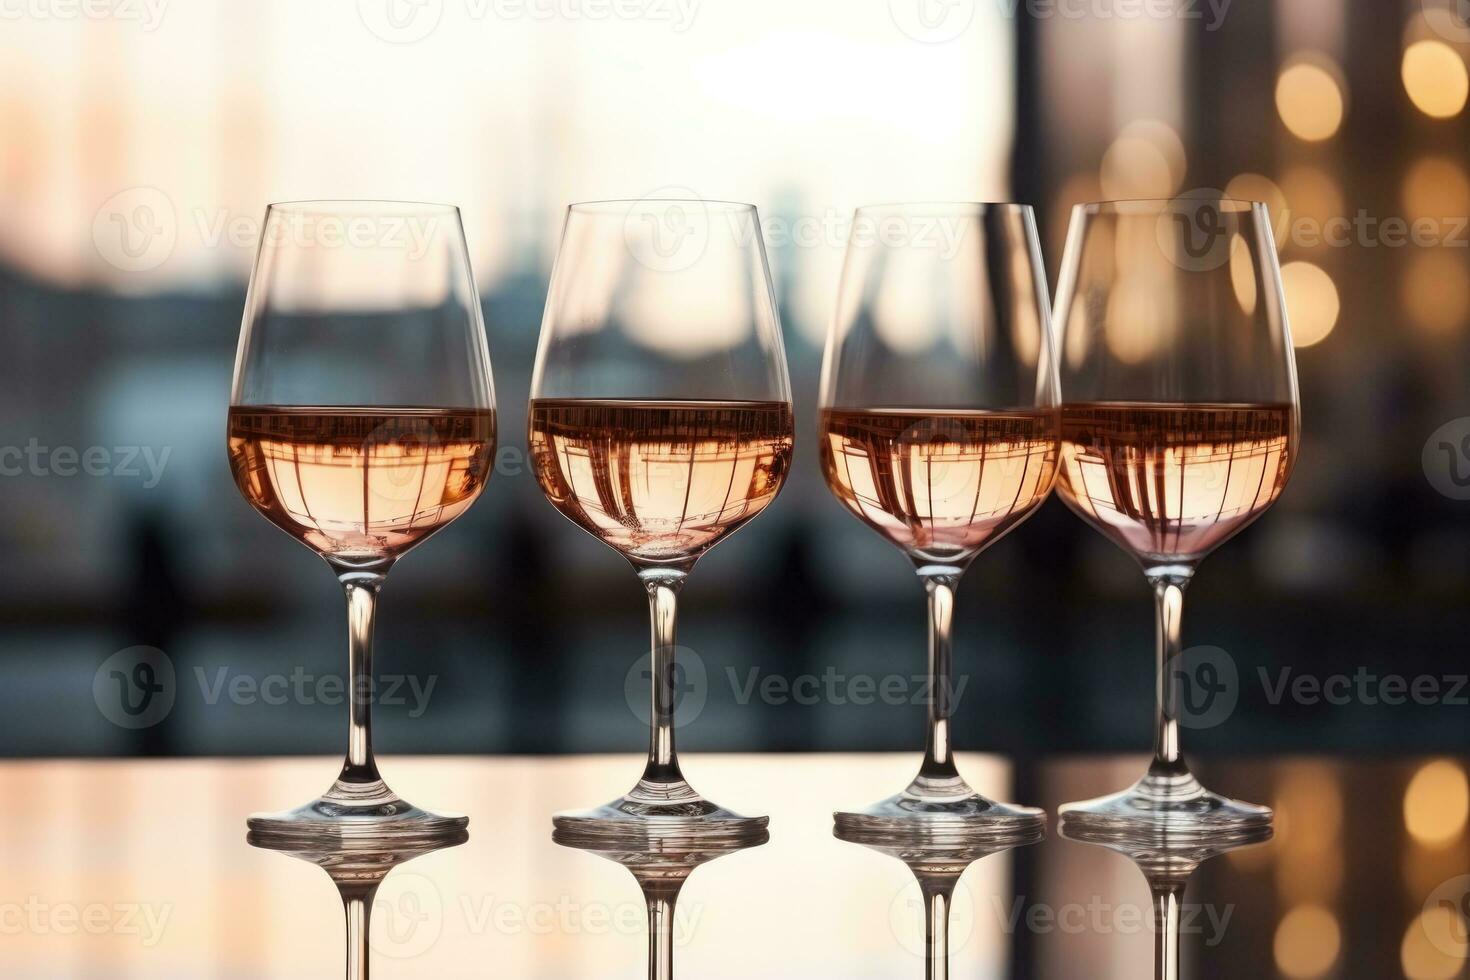 Reflections in glasses during ice wine tasting background with empty space for text photo